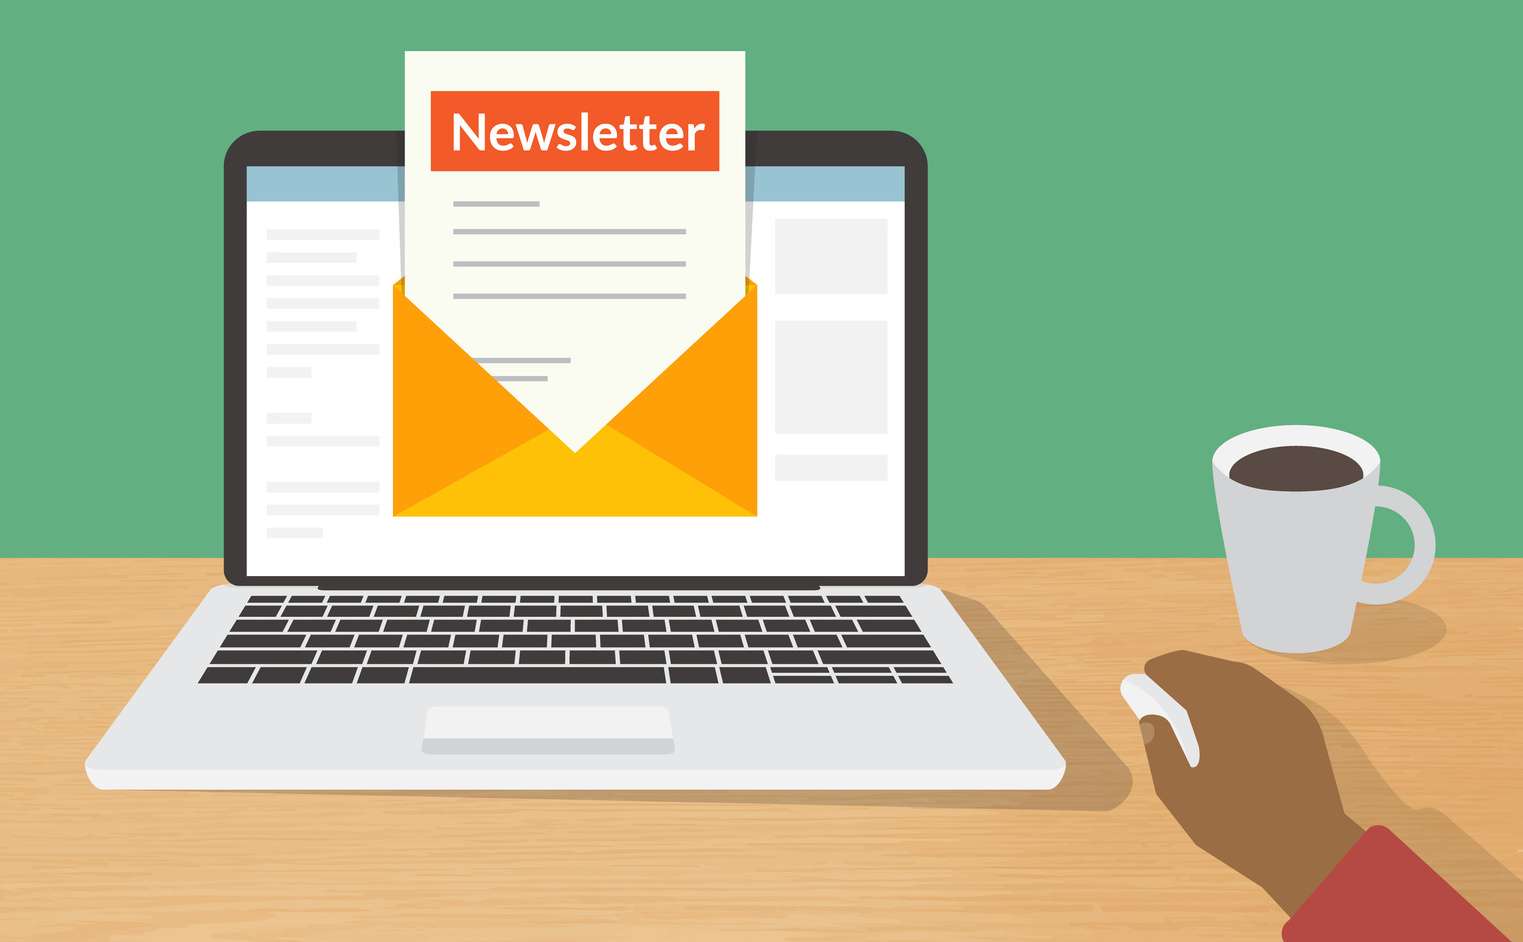 How to Make Your Newsletters More Engaging